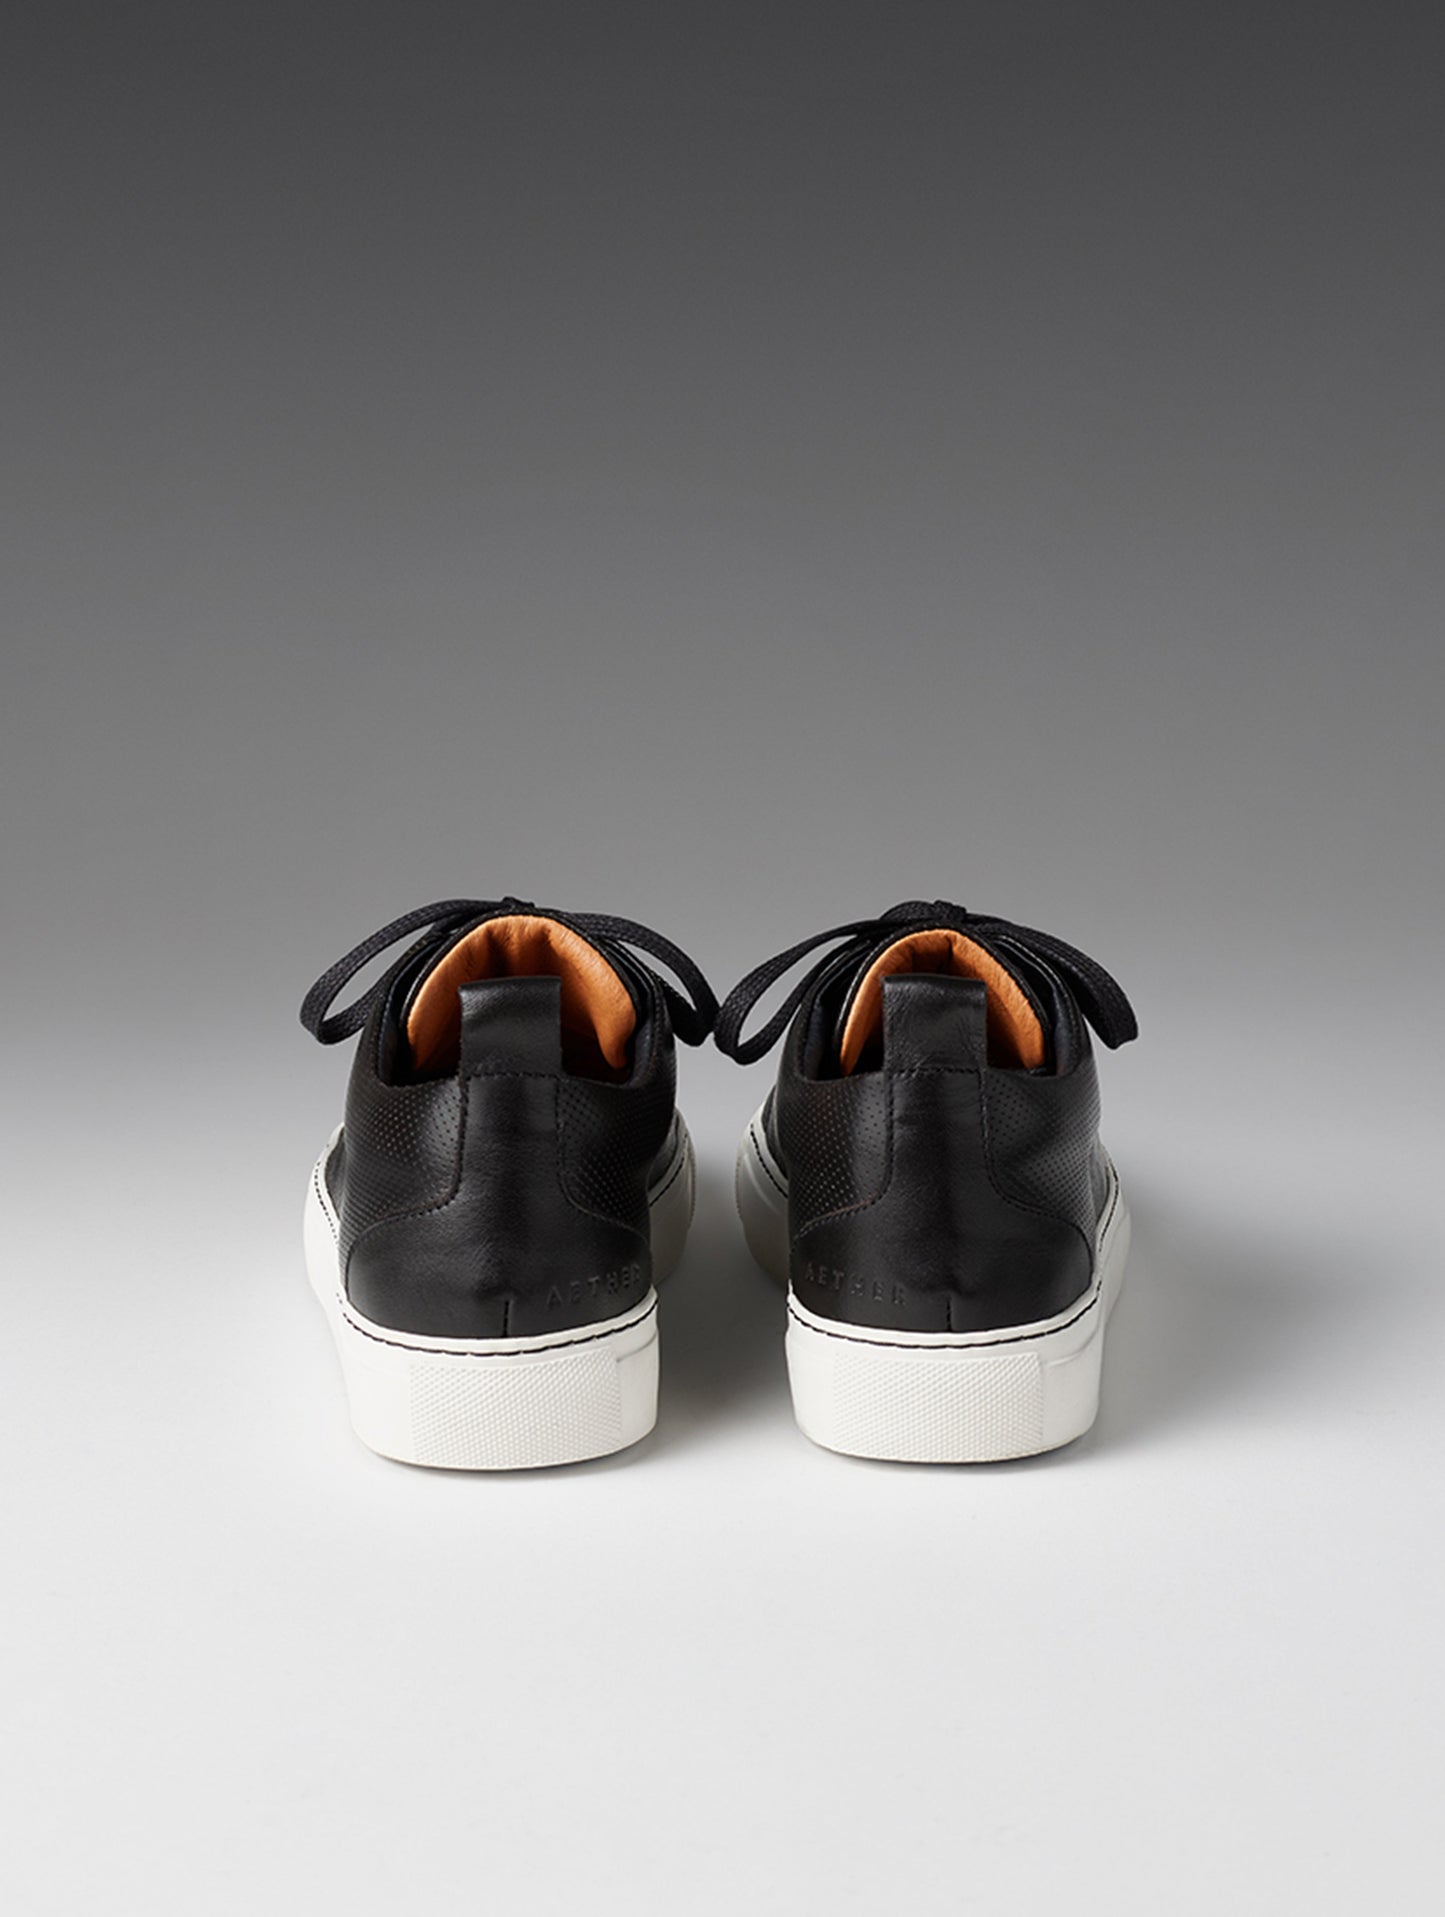 sneakers for women from Aether Apparel